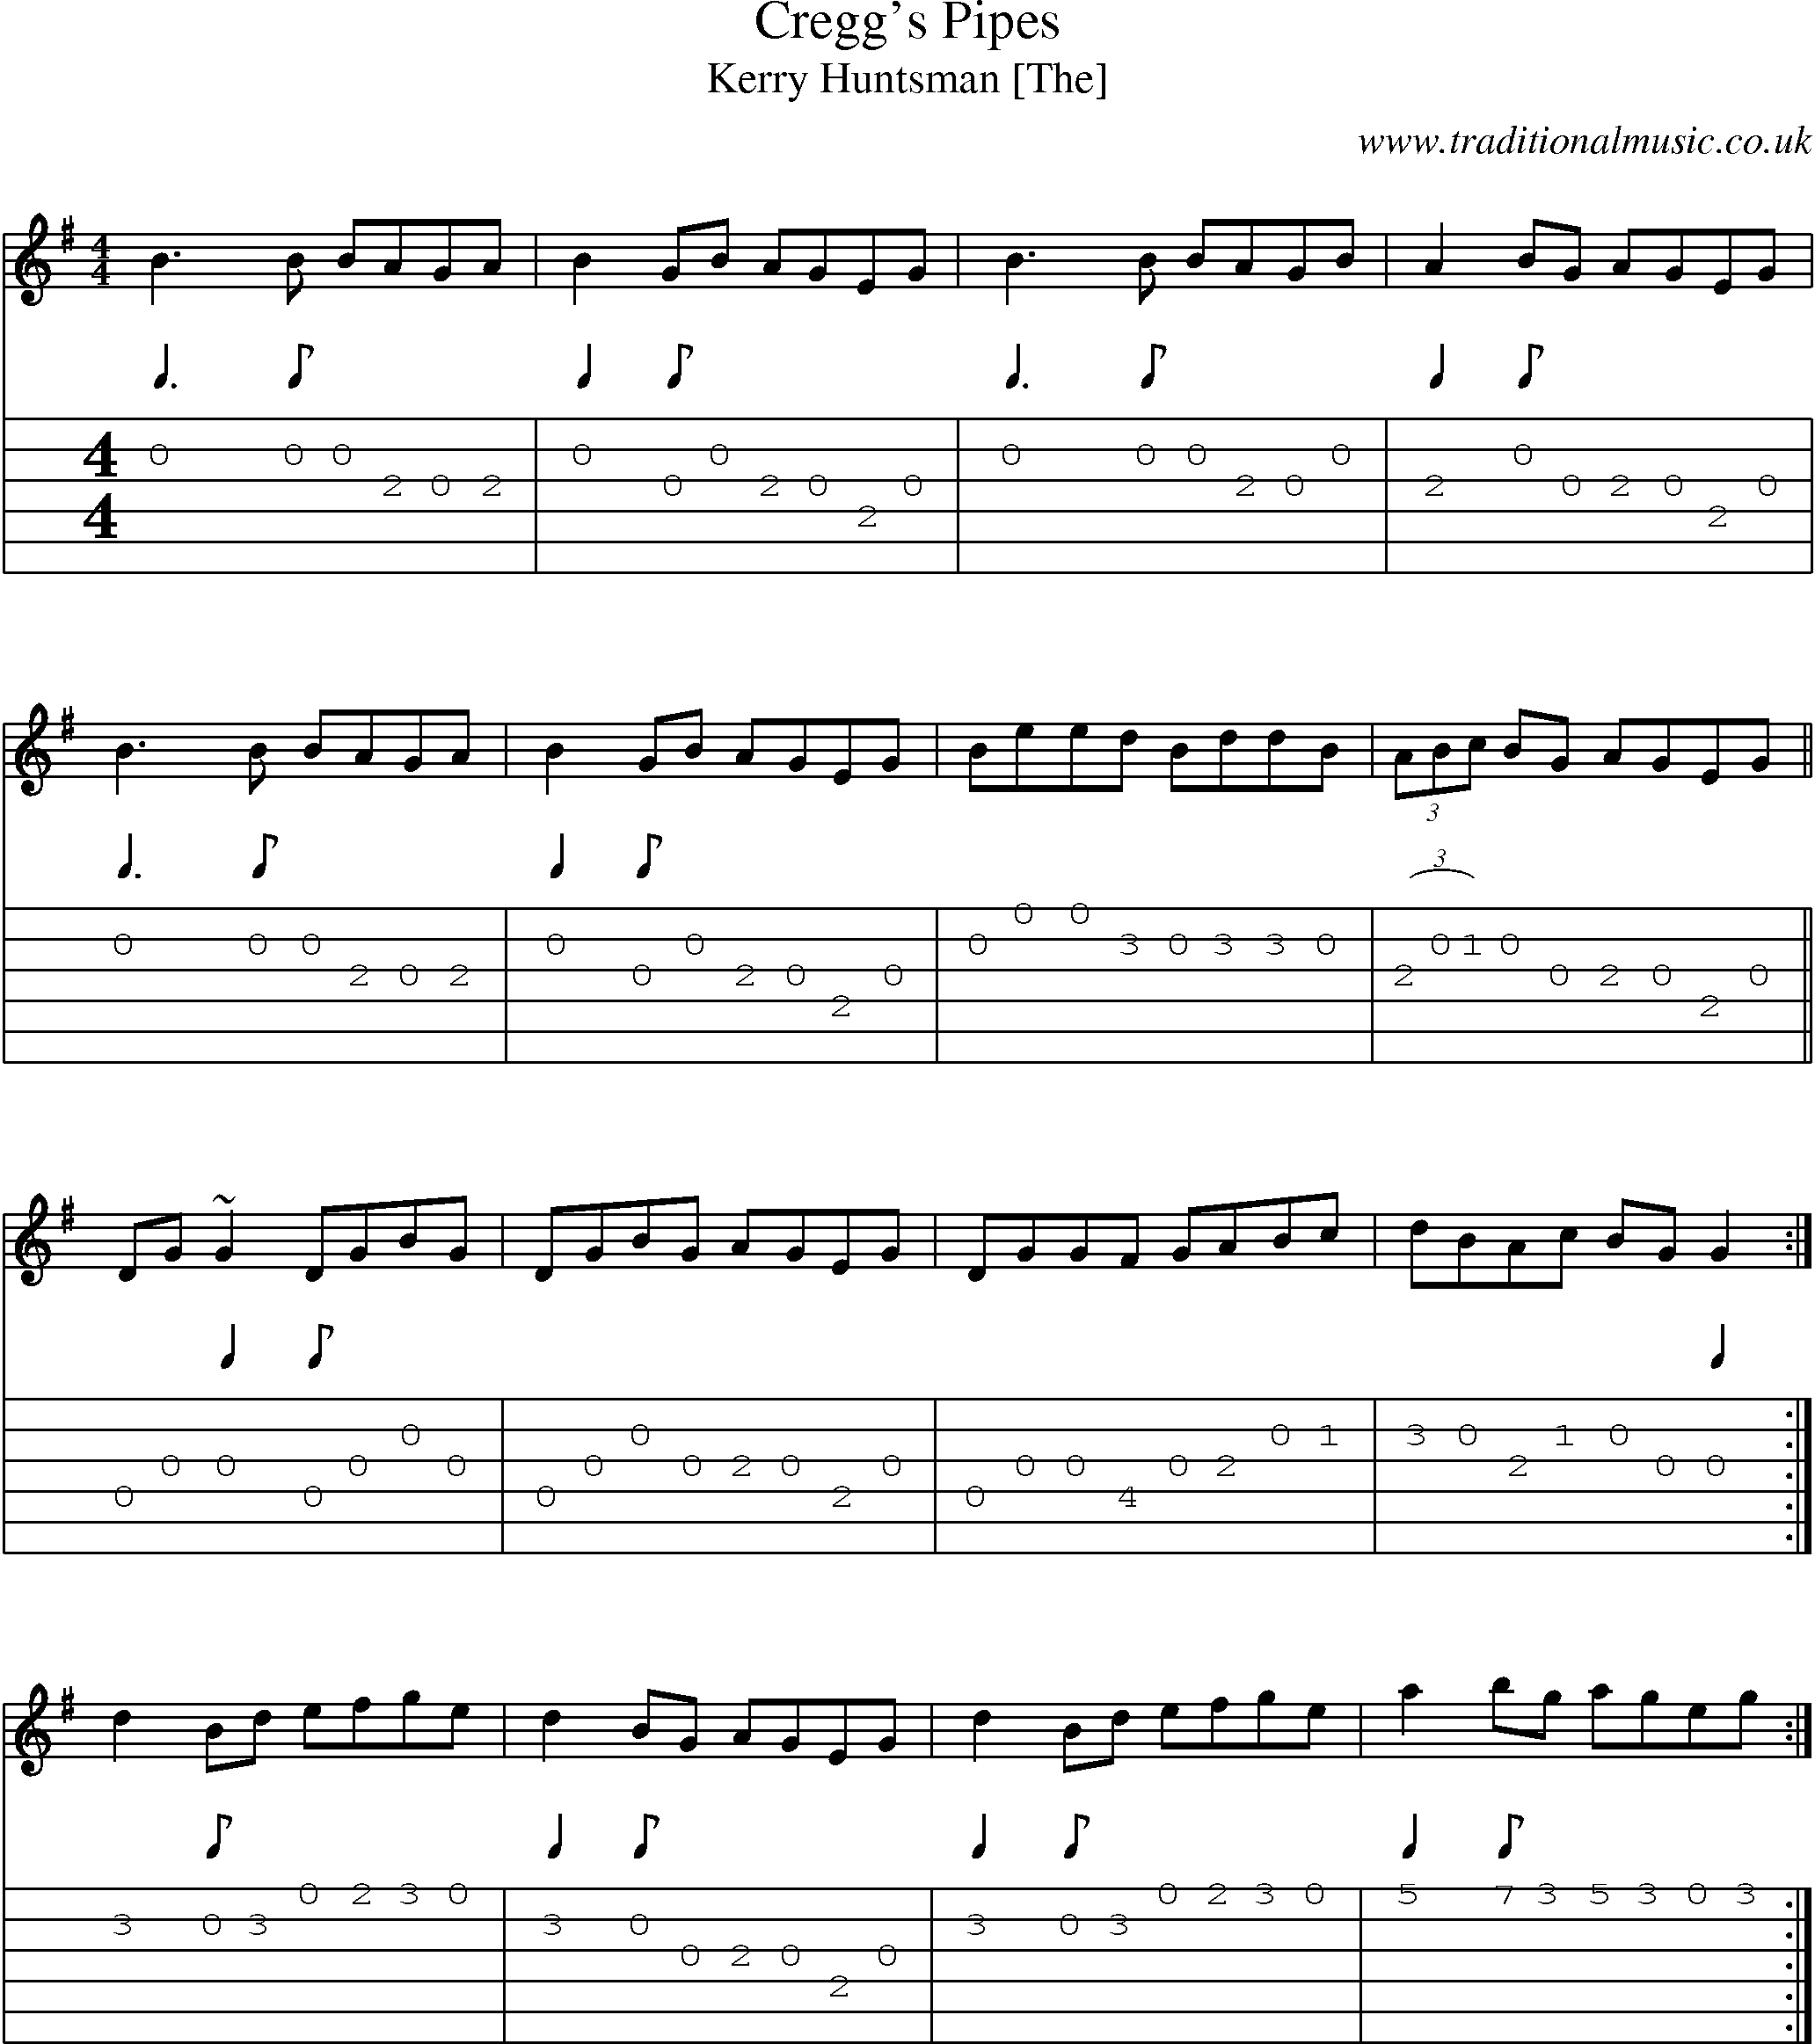 Music Score and Guitar Tabs for Creggs Pipes